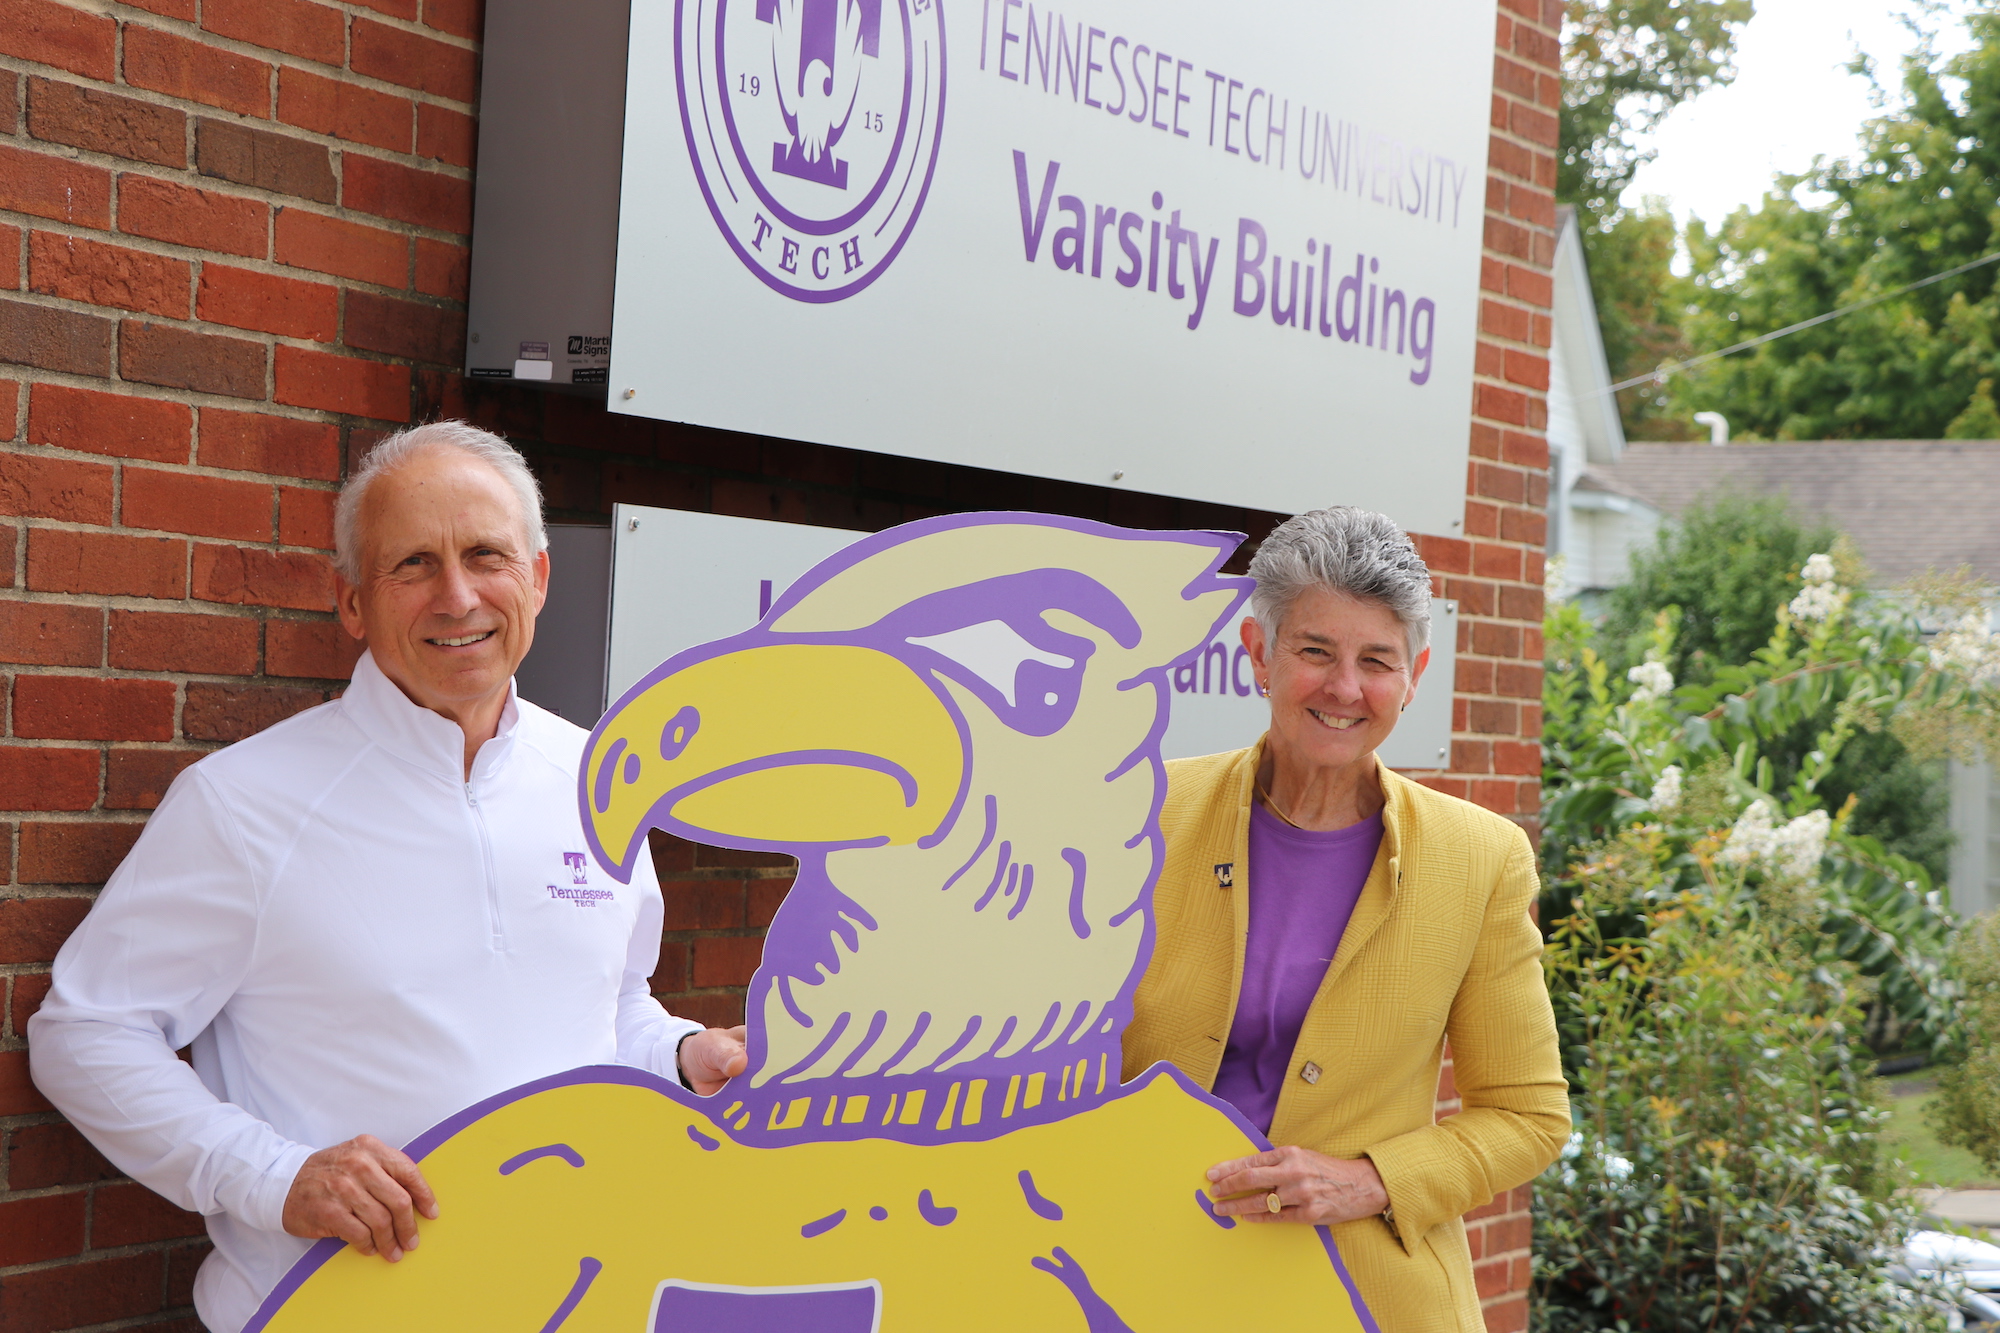 A photo of Ottis Phillips and Dianne Murphy in front of the Varsity Building. They are smiling and standing behind a cardboard cutout of Tommy Tech.